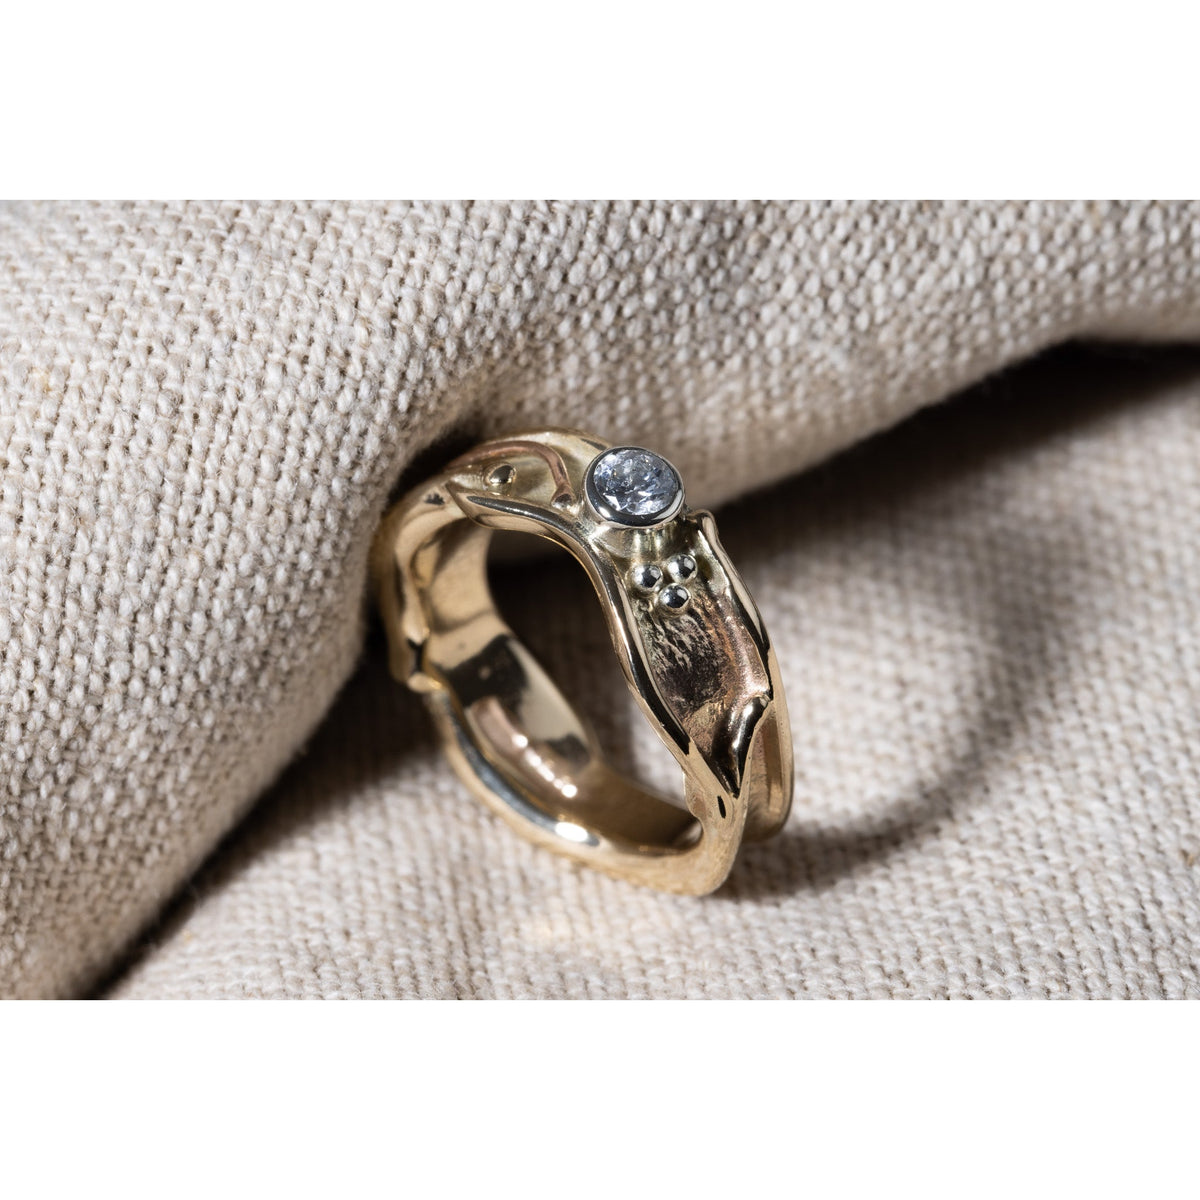 &#39;LG25 9ct Gold &amp; Diamond Ring&#39; by Les Grimshaw, available at Padstow Gallery, Cornwall